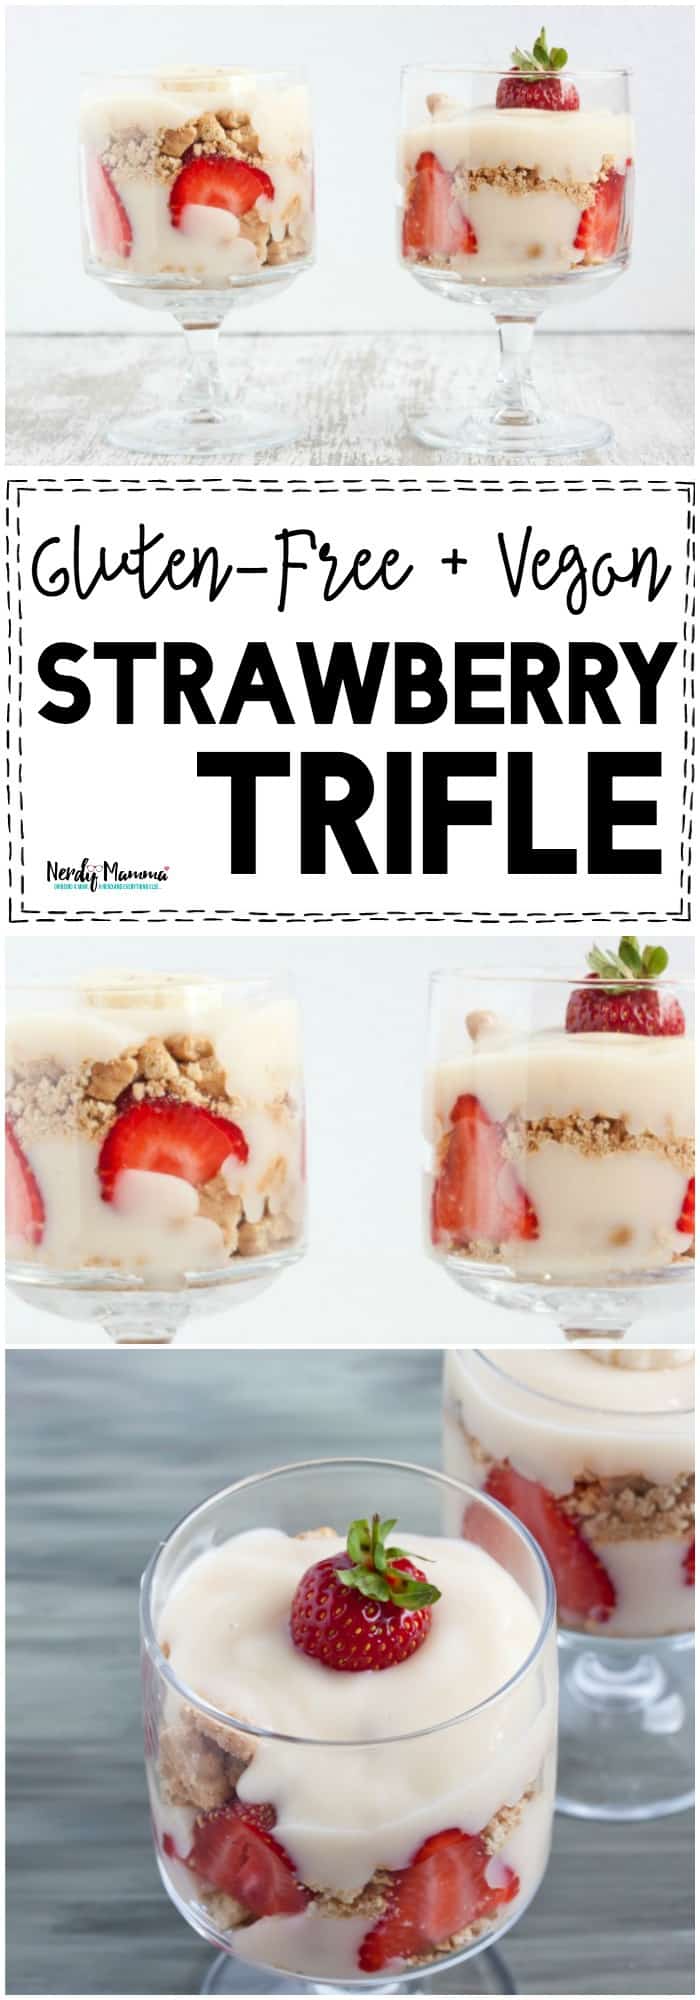 I cannot wait to make this easy gluten-free and vegan strawberry trifle. I mean YUM!